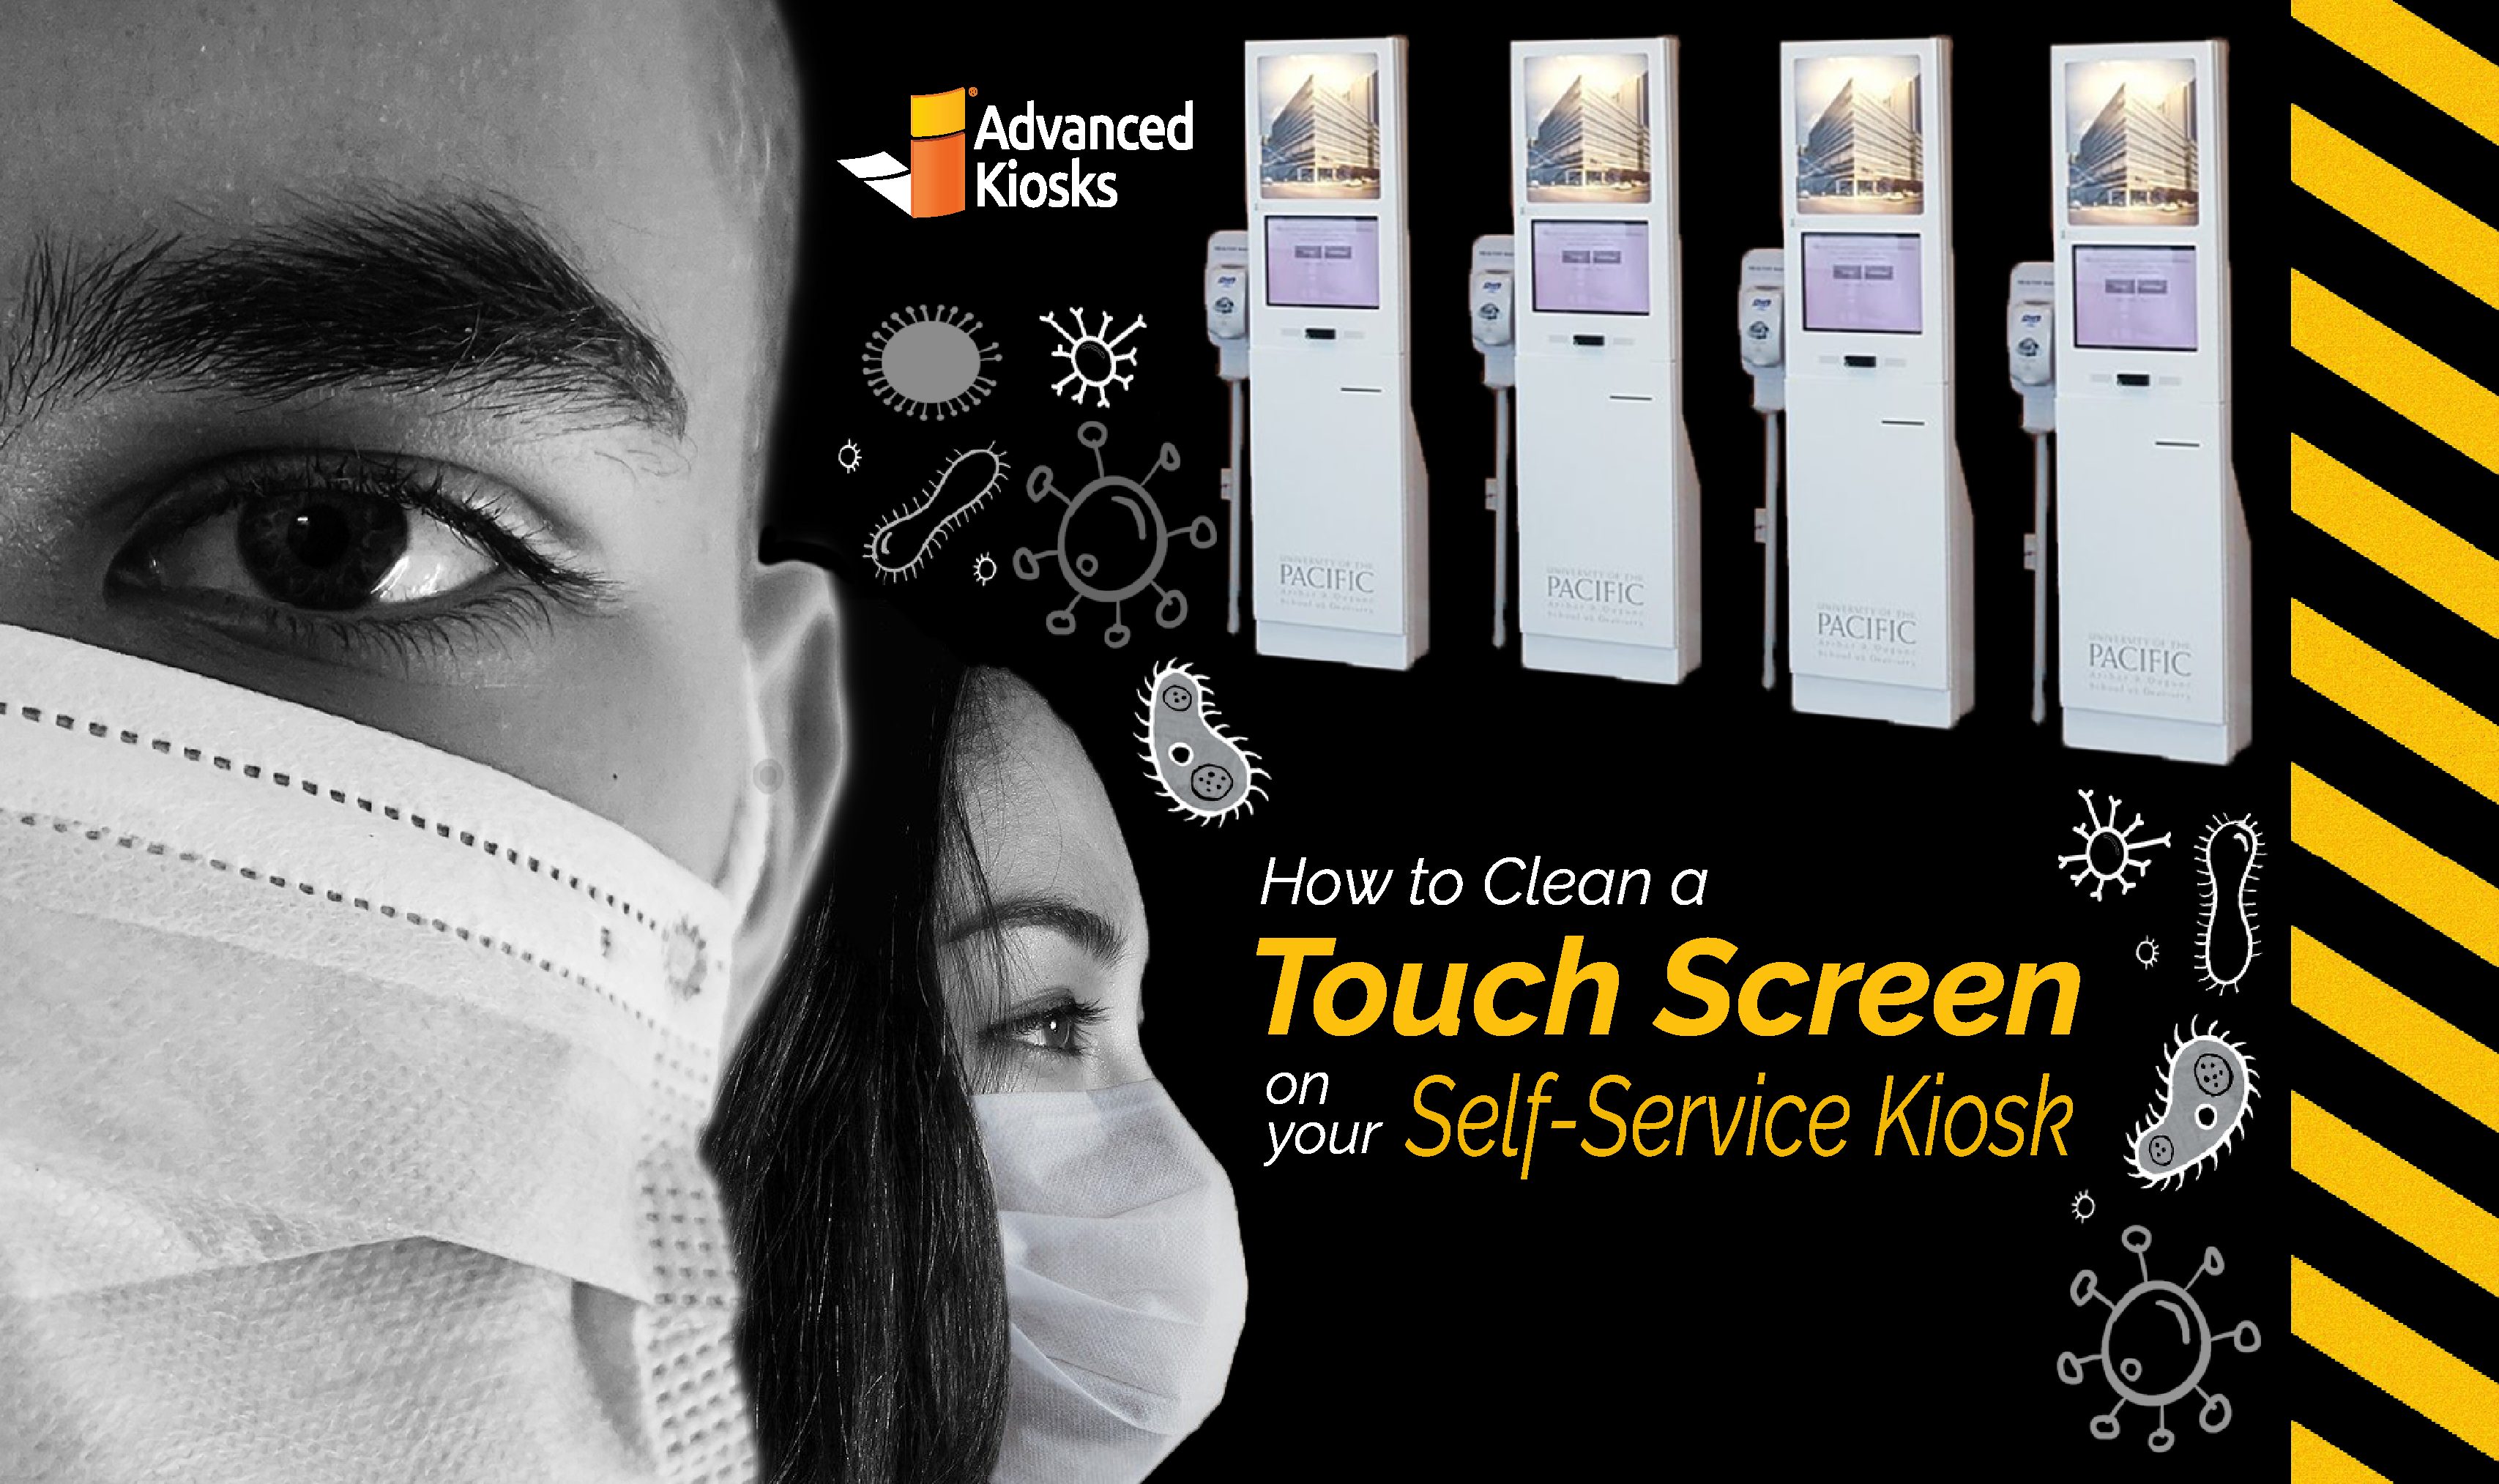 How to Clean a Touch Screen on Your Self-Service Kiosk